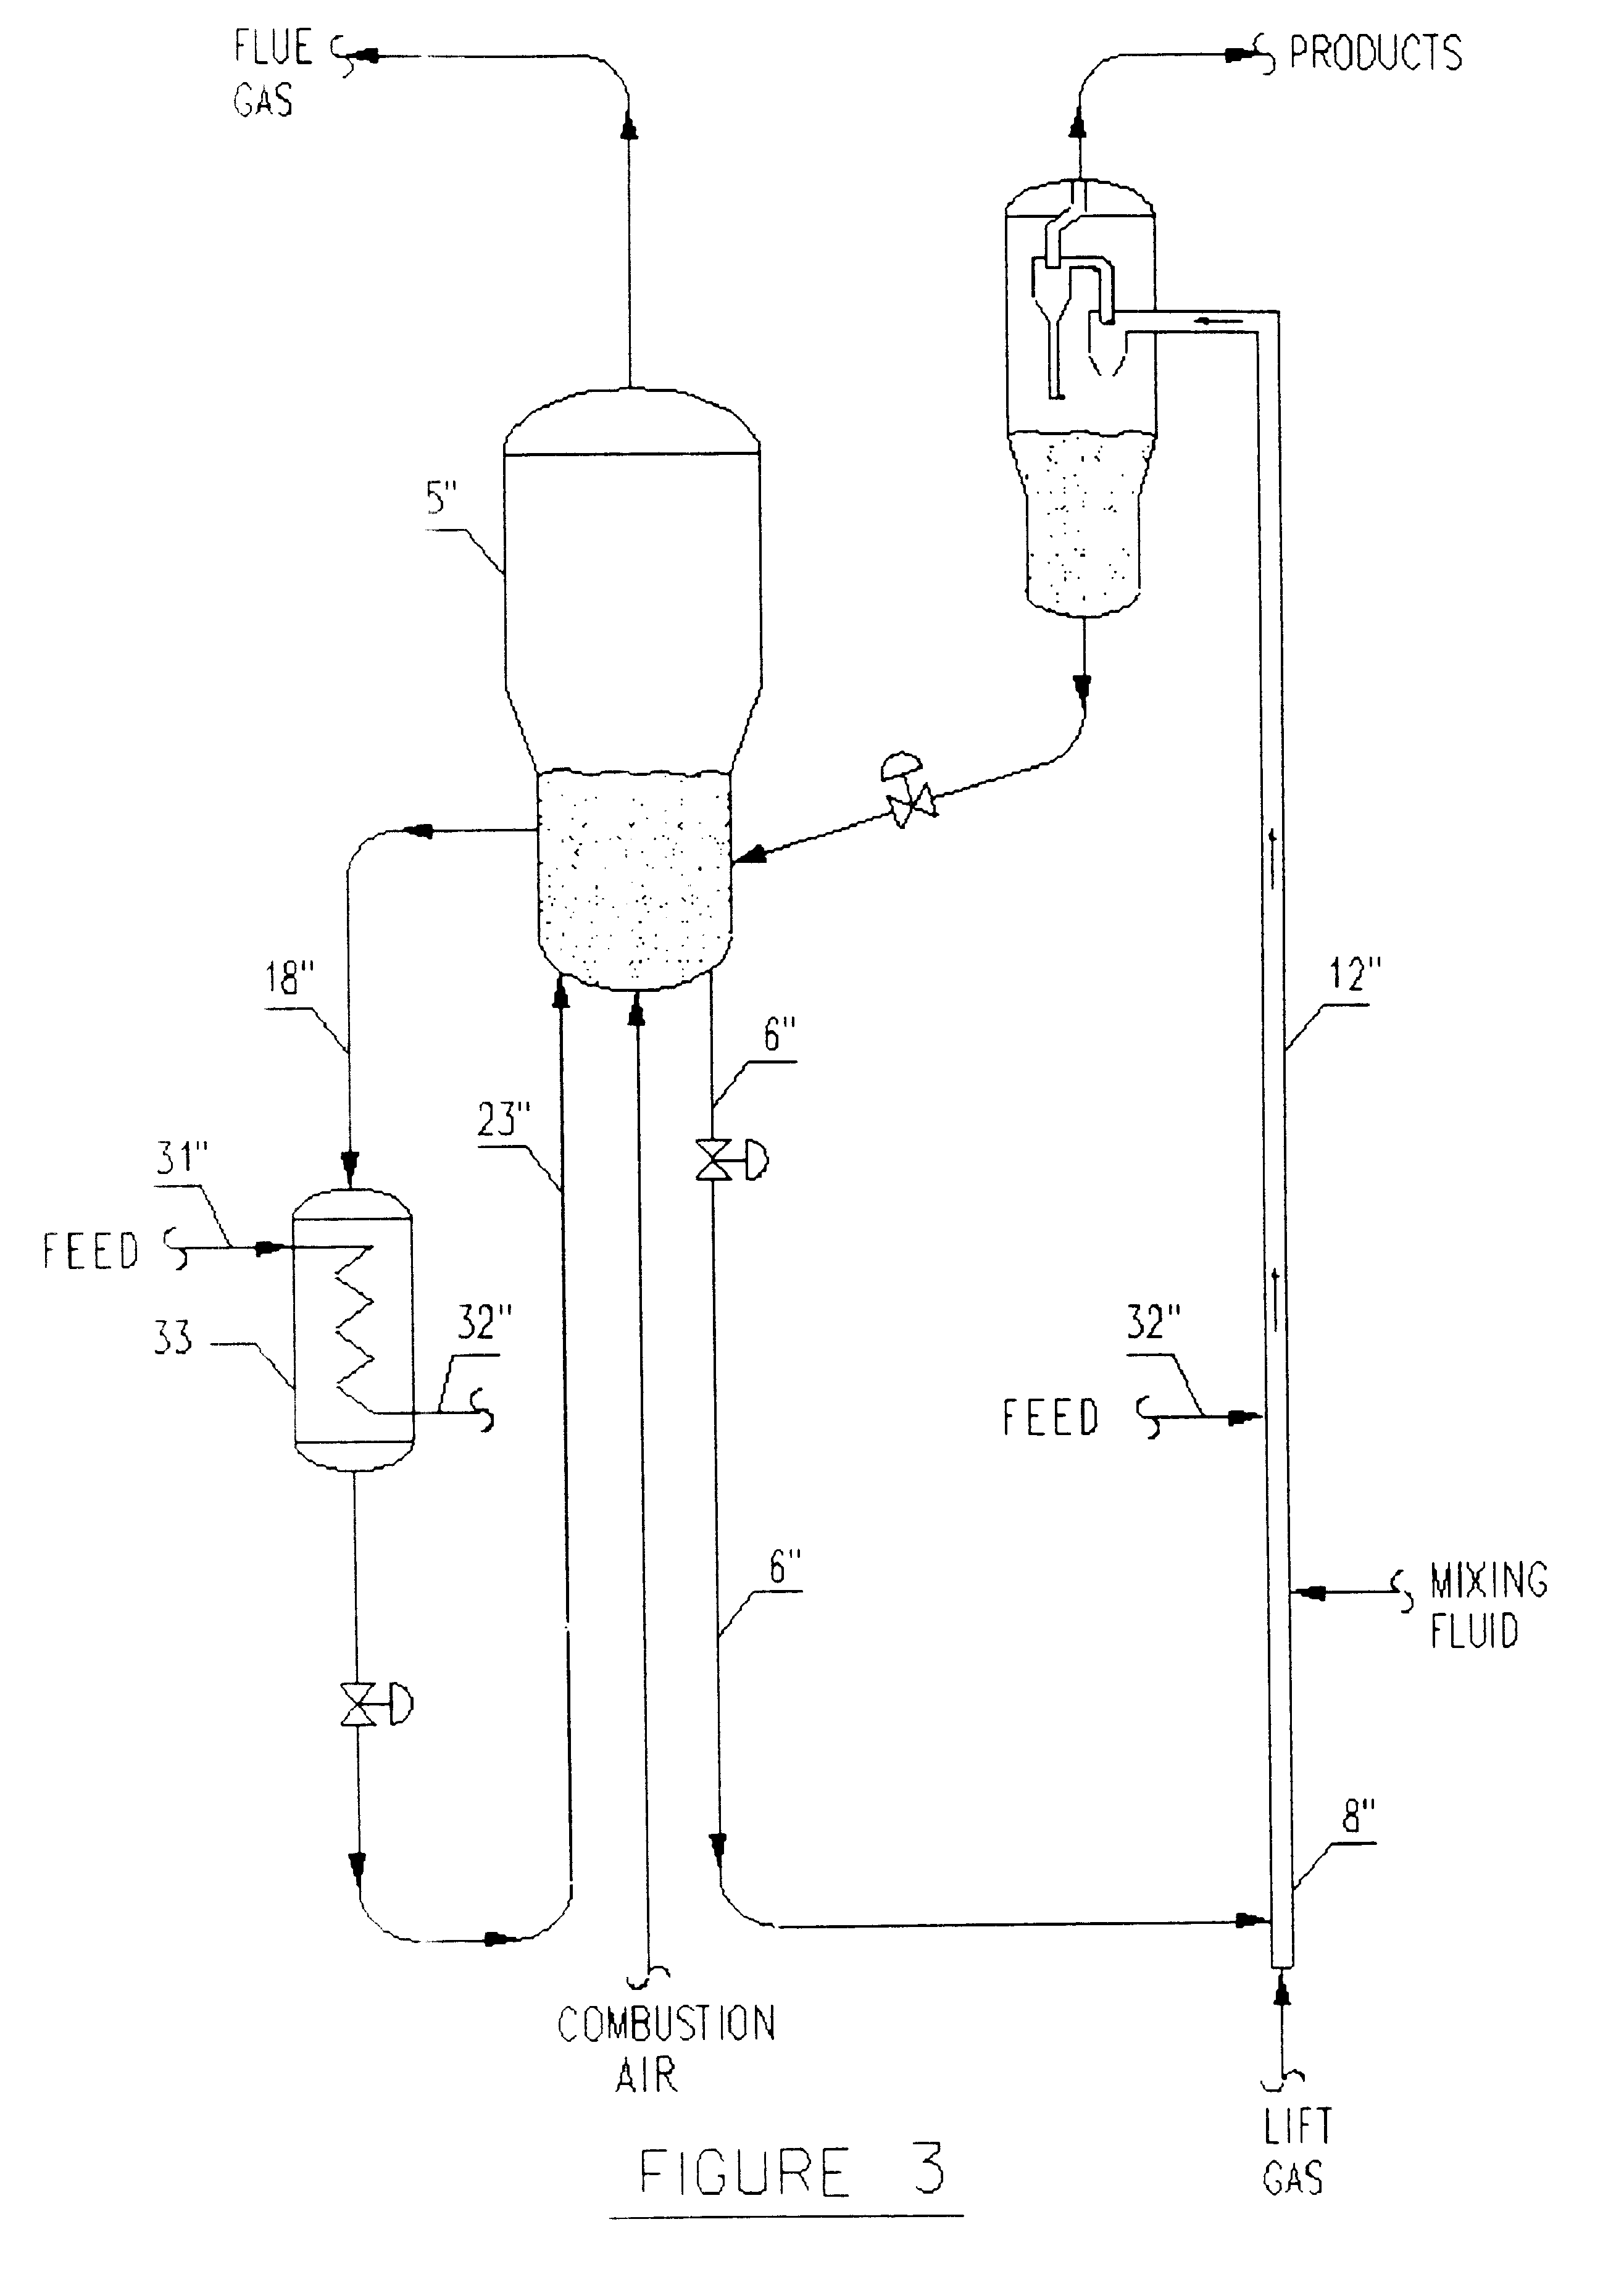 Process for the fluid catalytic cracking with pre-vaporized feed